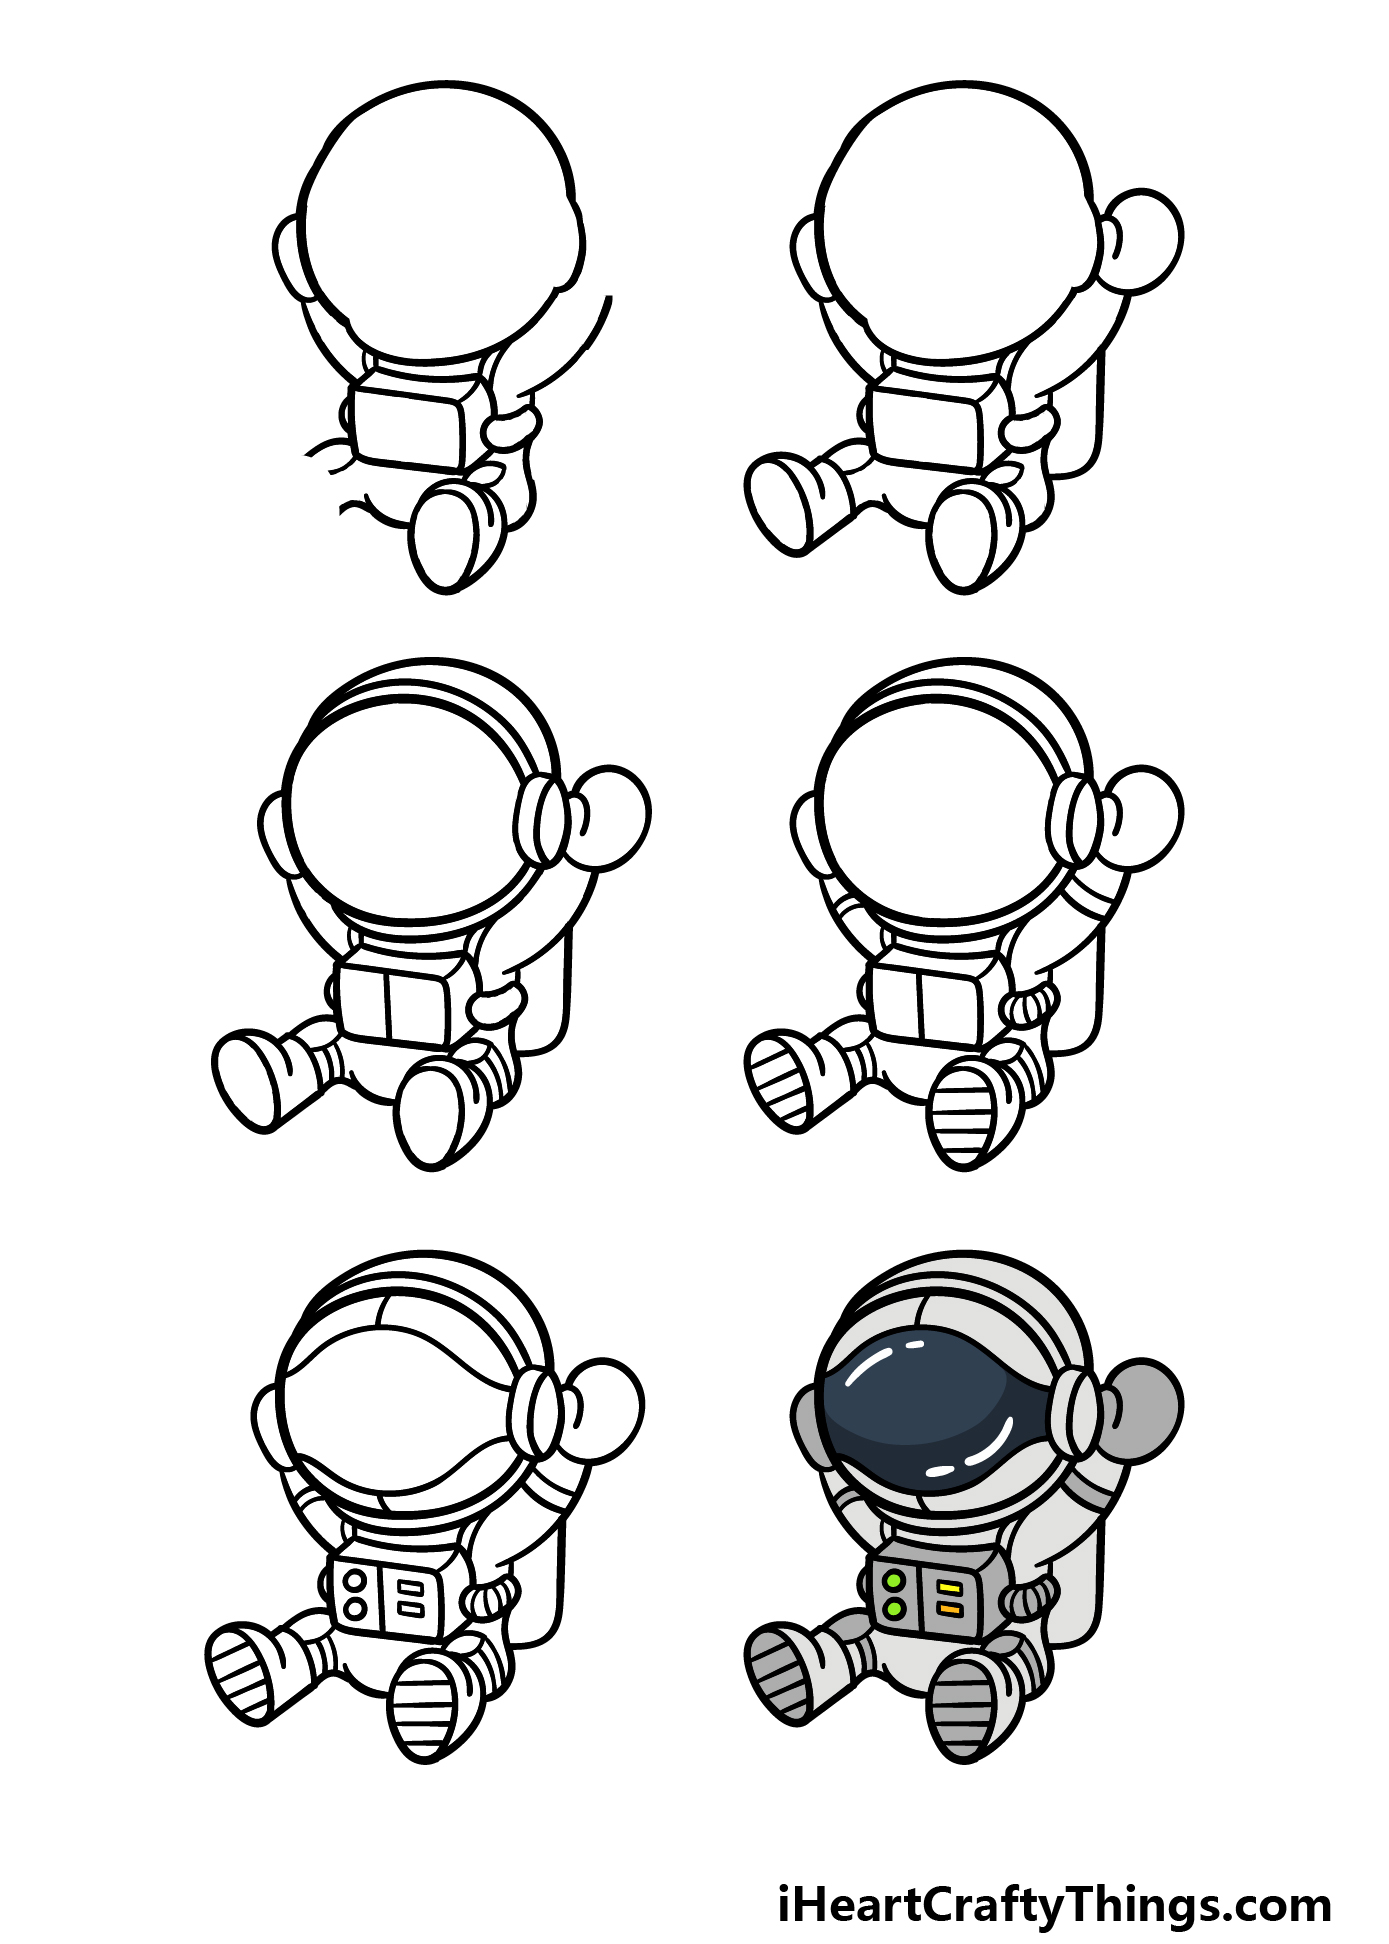 how to draw a Cartoon Astronaut in 6 steps